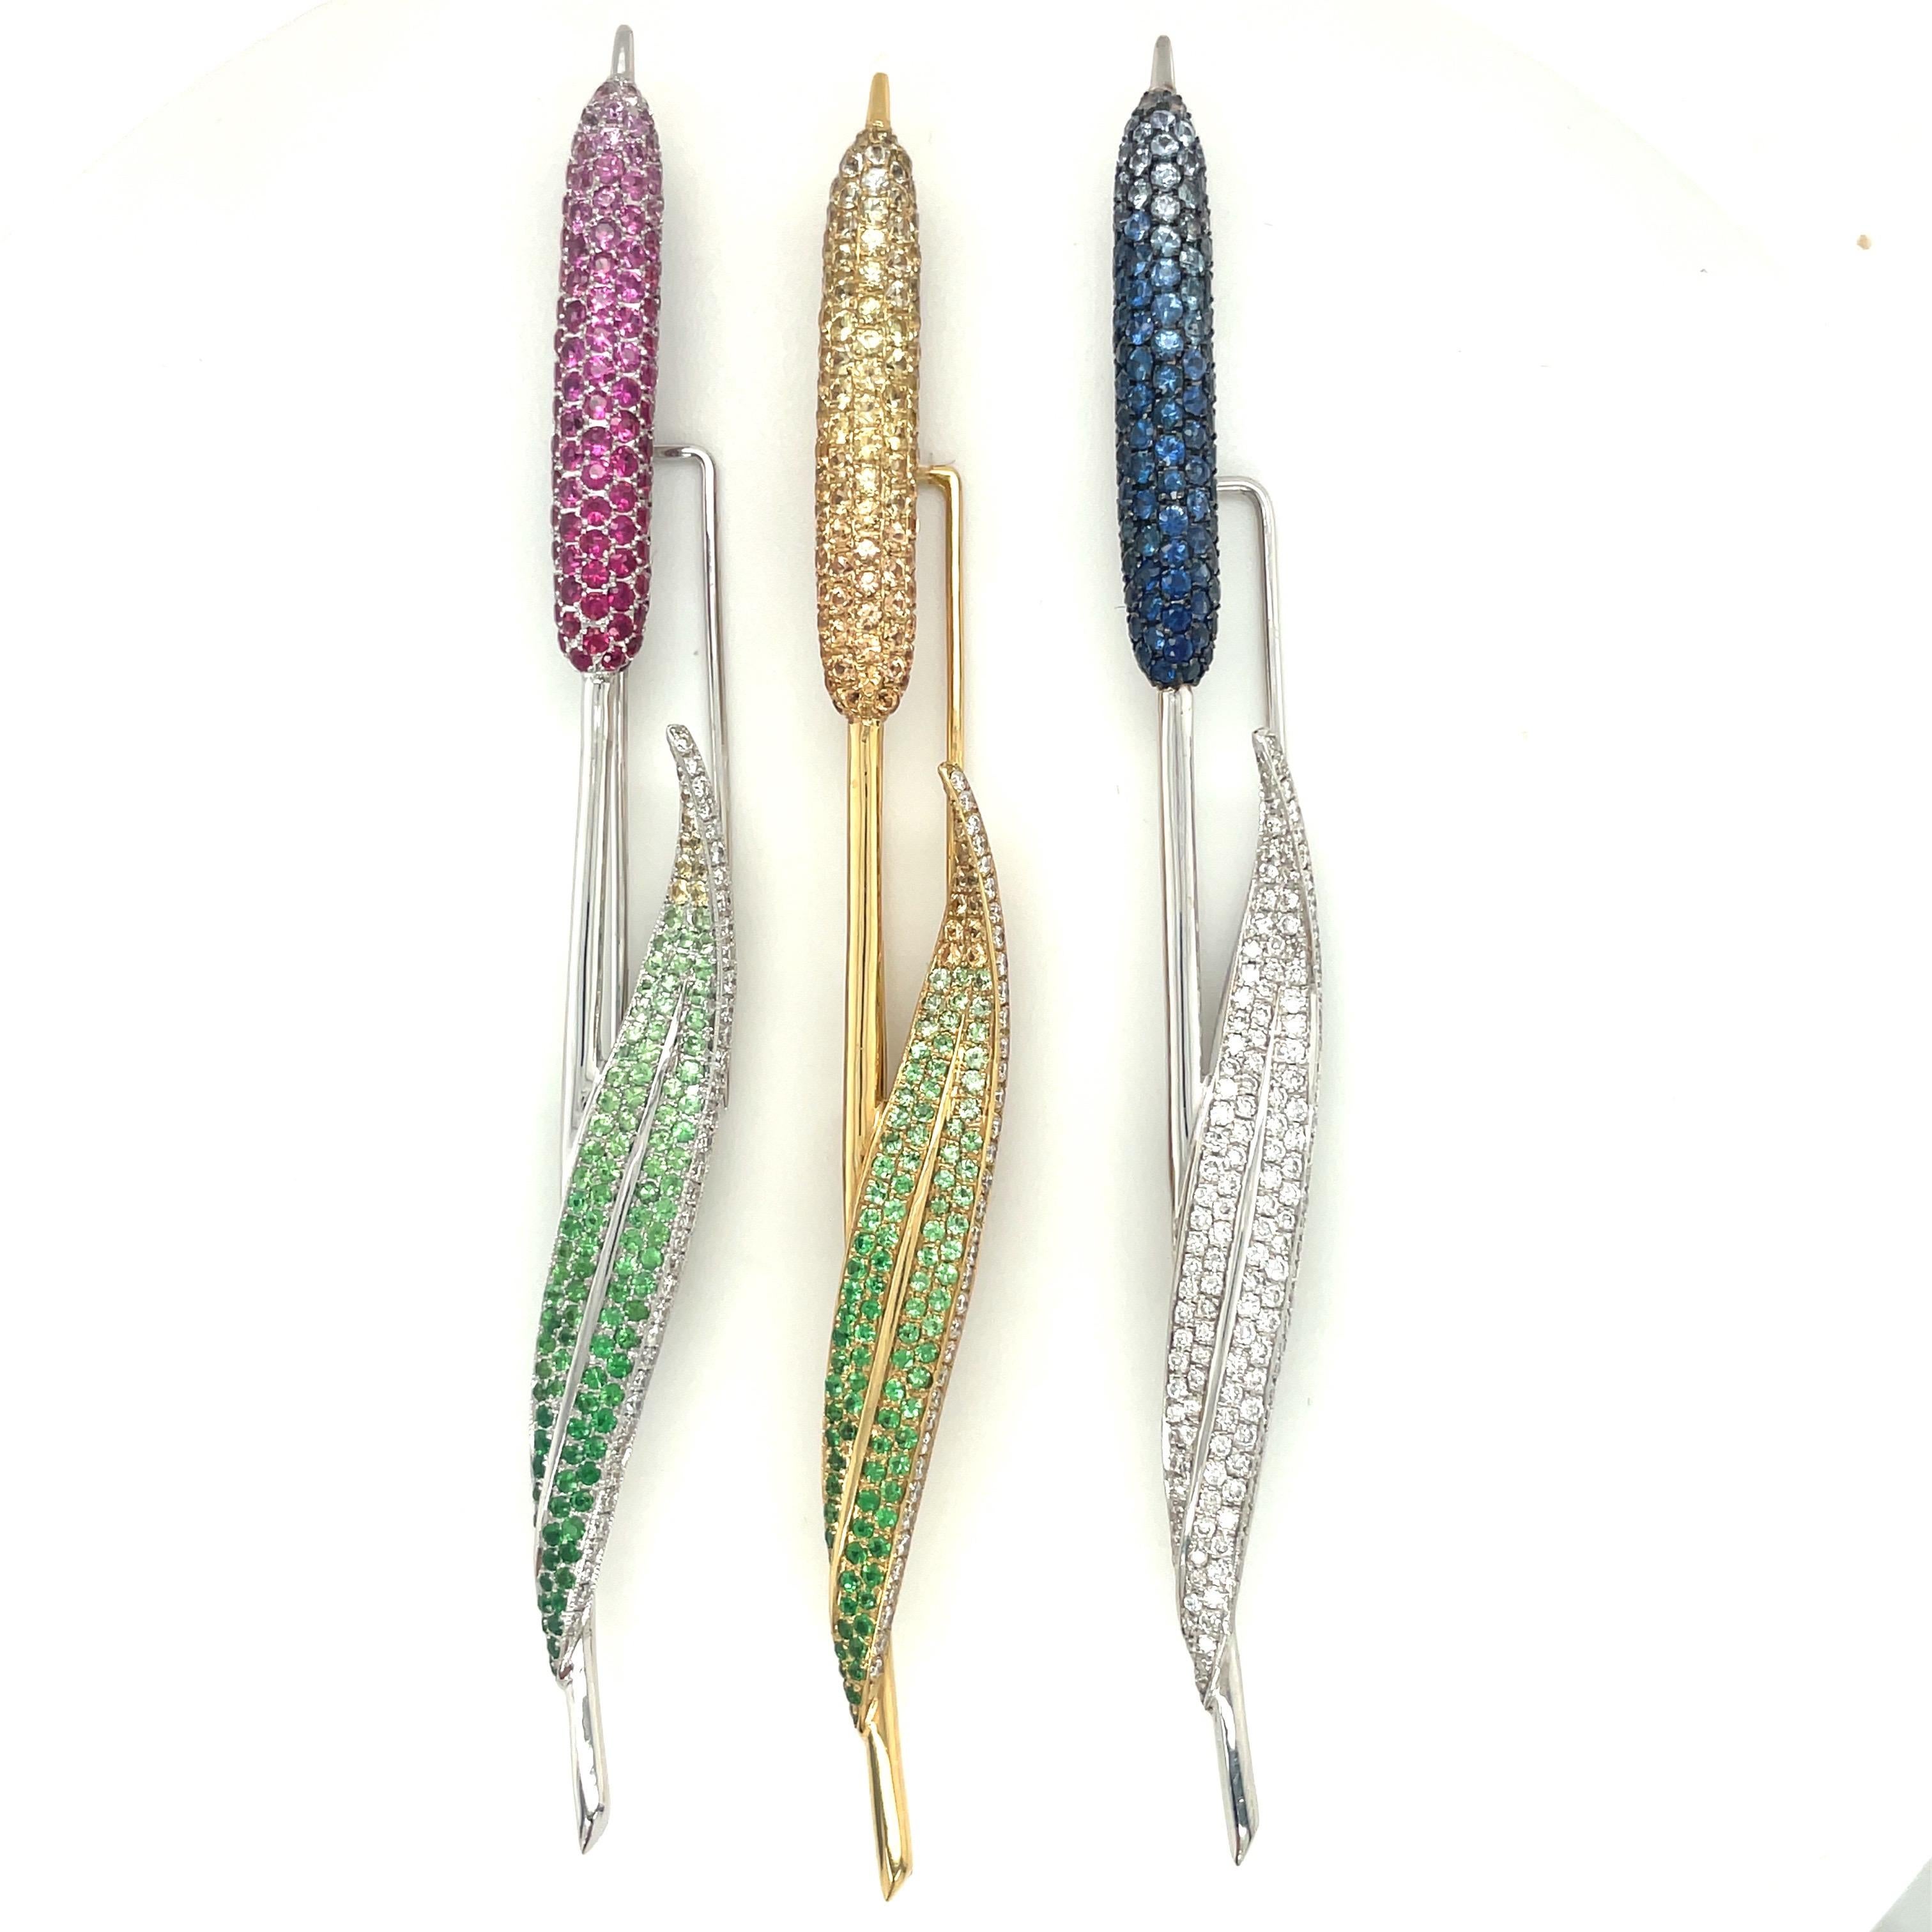 A beautiful elongated 18 karat white gold pussy willow brooch. The flower is set with ombre shades of pink sapphires.  The stem is set with round brilliant diamonds, and shades of green tsavorites. The pussy willow measures 4-5/8